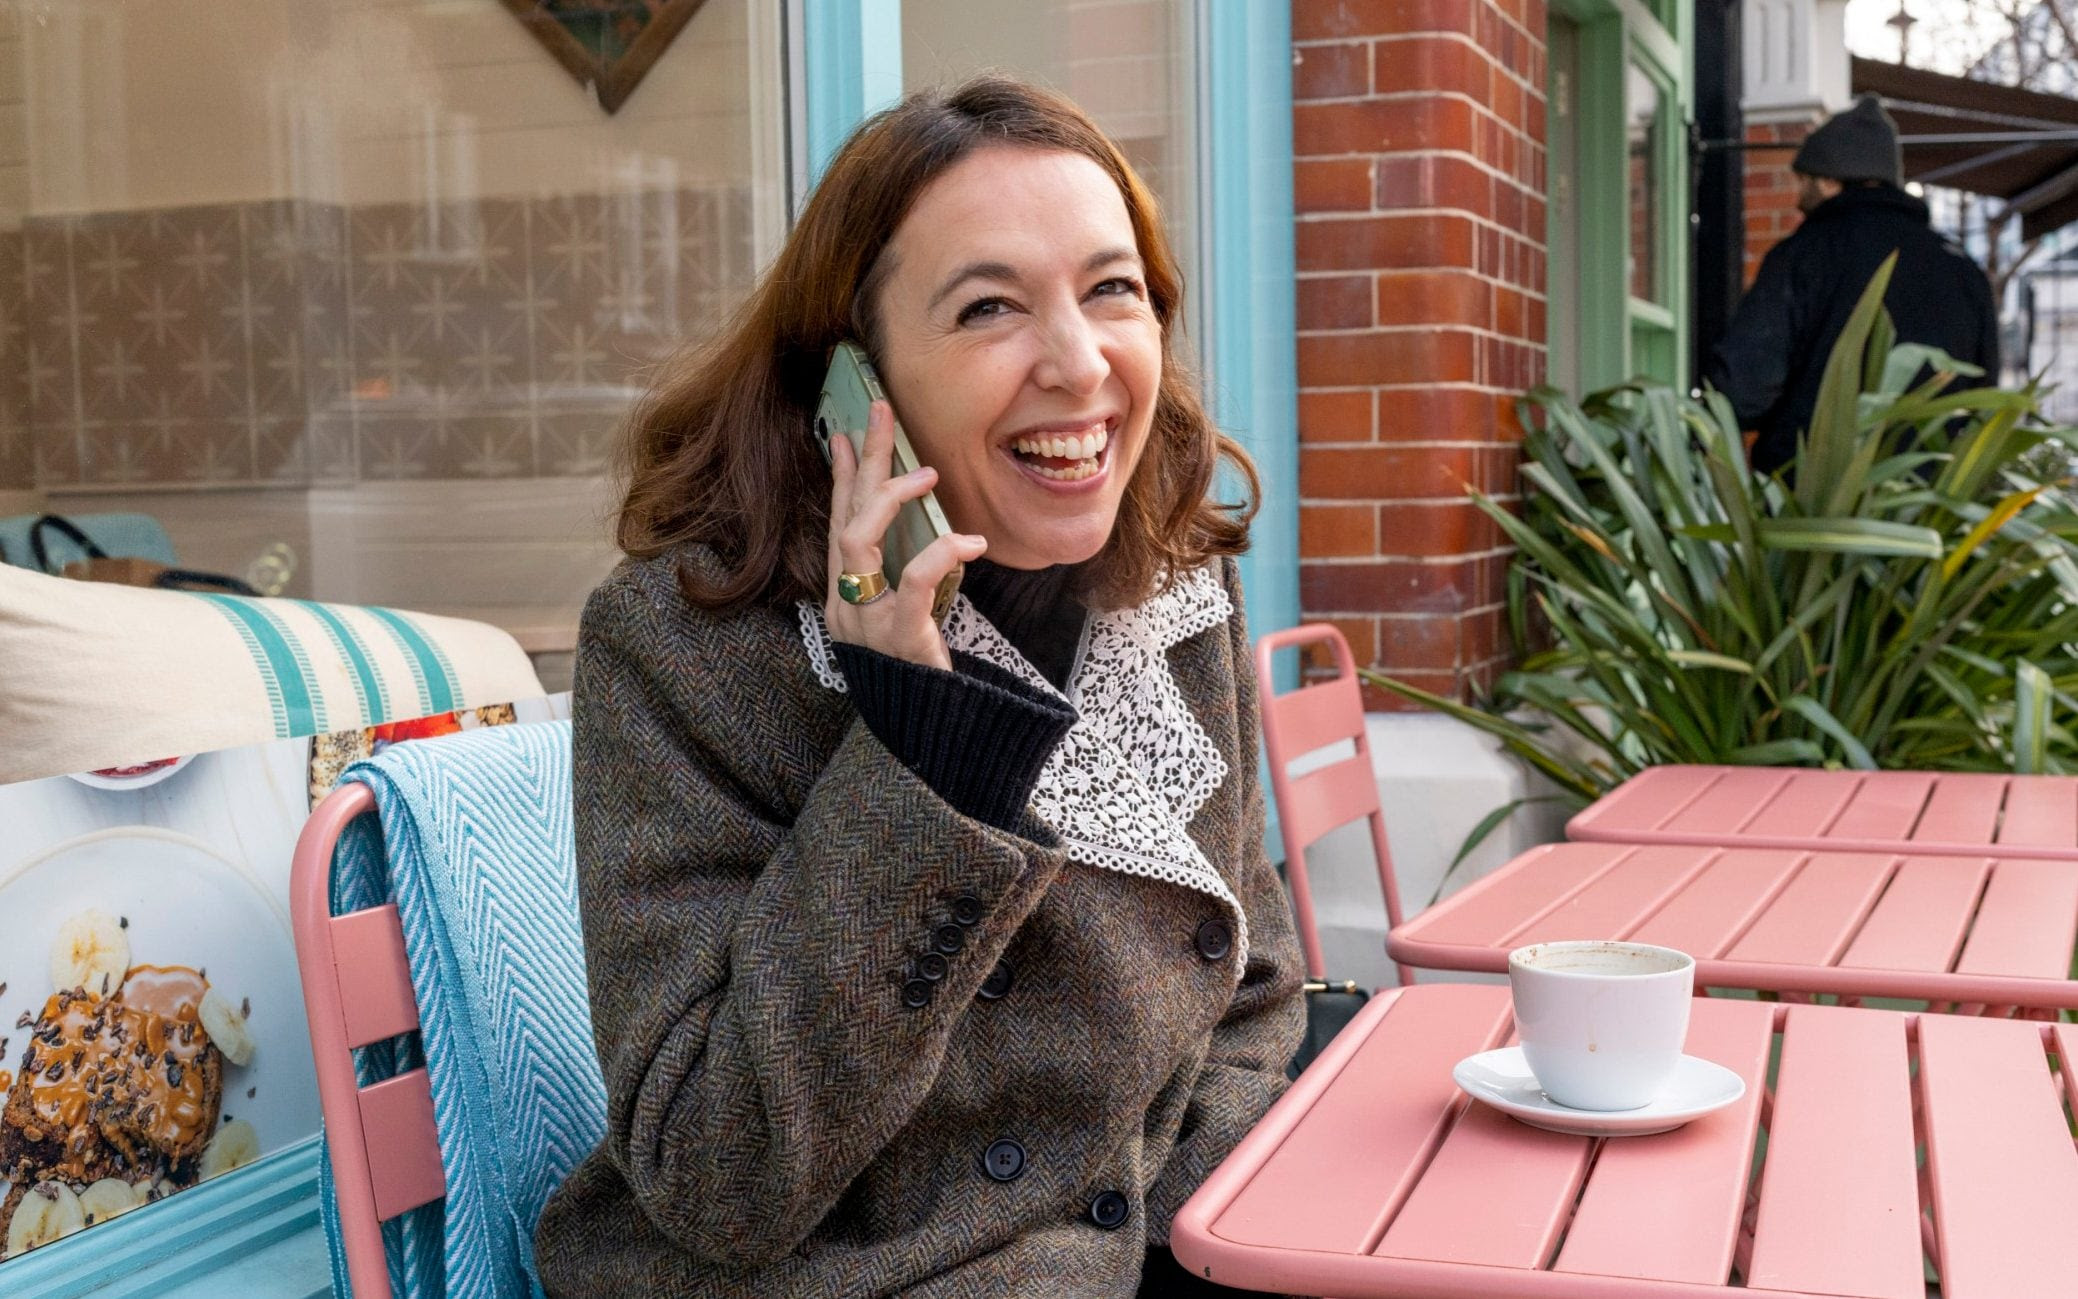 A woman on the phone, smiling